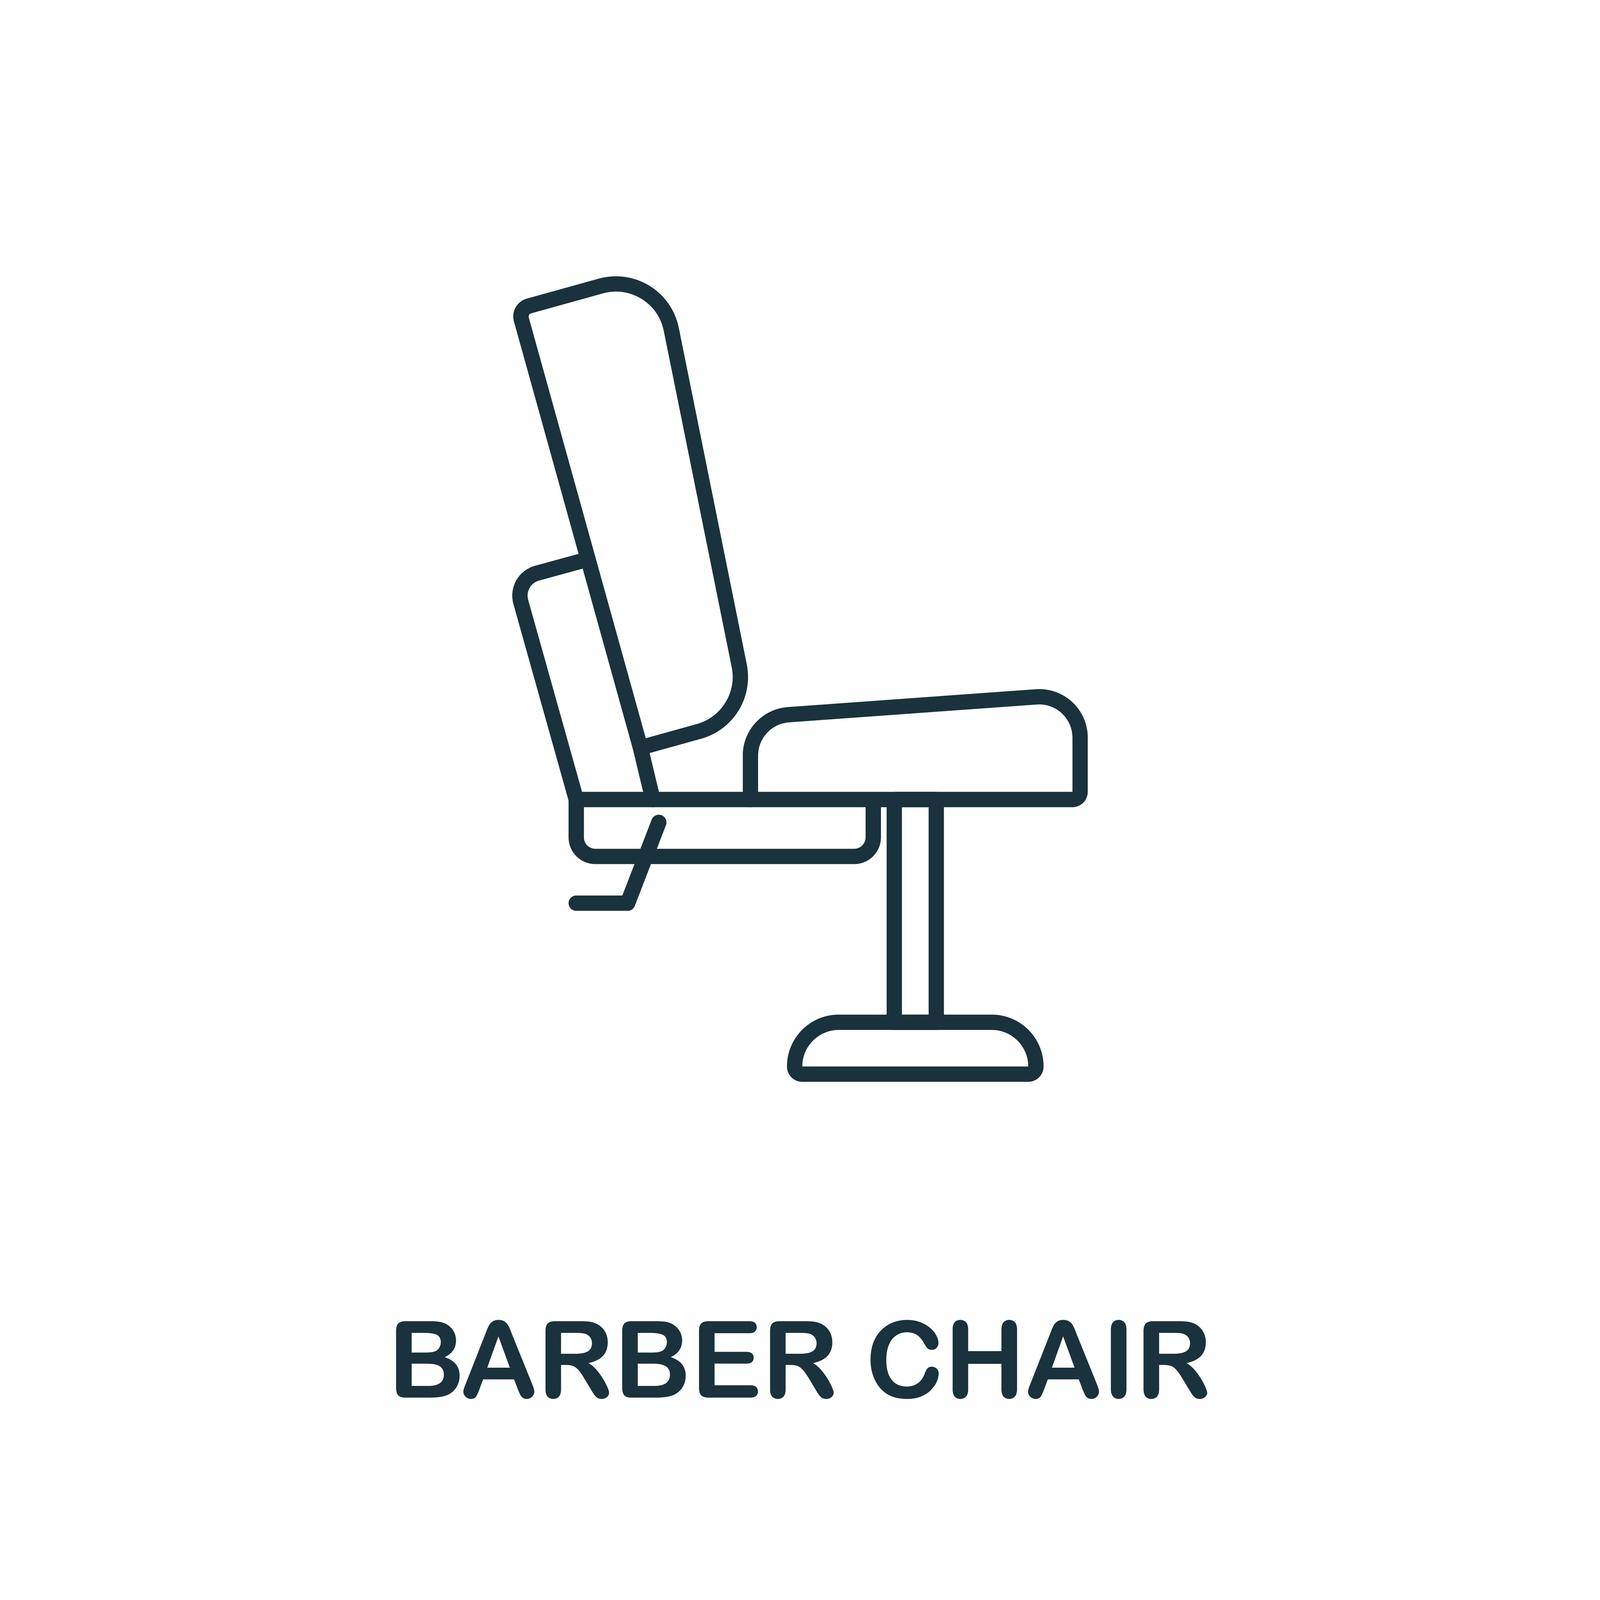 Barber Chair icon. Outline sign from hairdresser collection. Line Barber Chair icon for infographics, wed design and more.